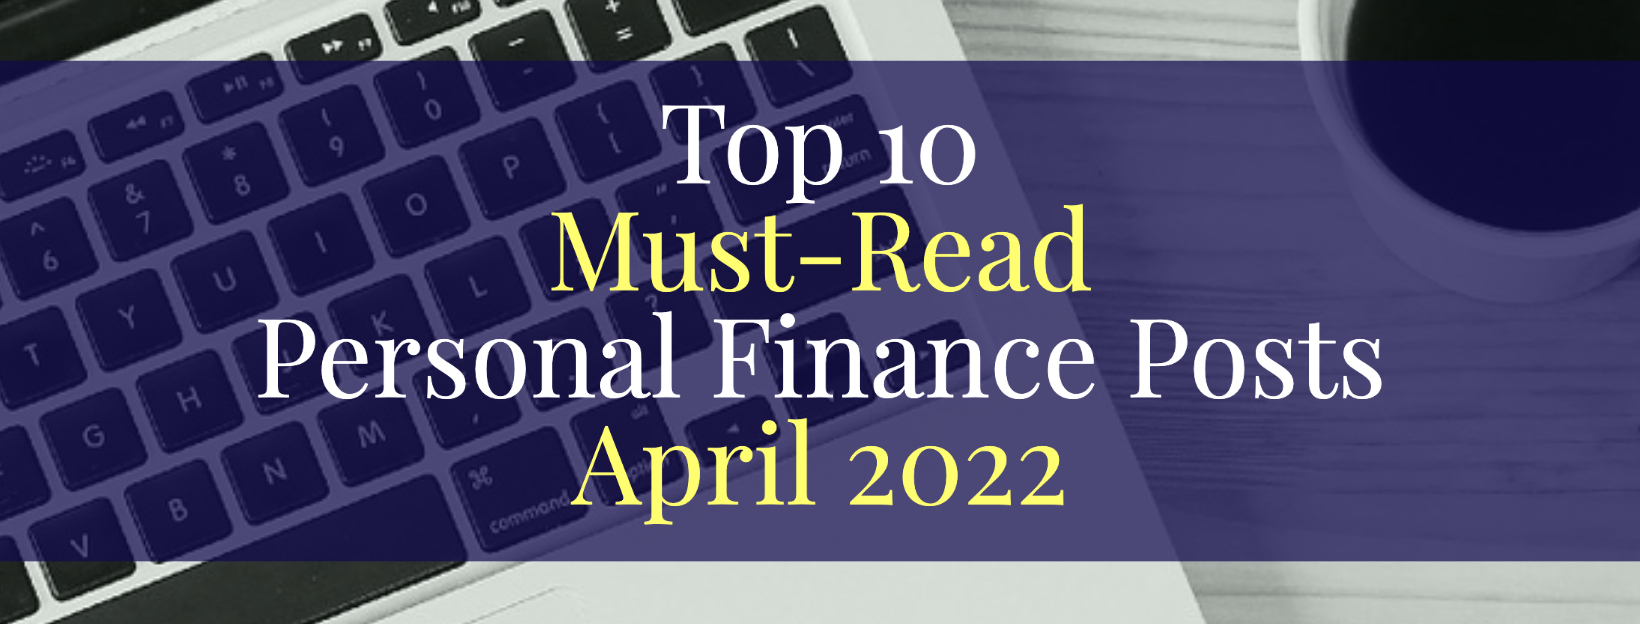 Top 10 Must Read Personal Finance Posts April 2022